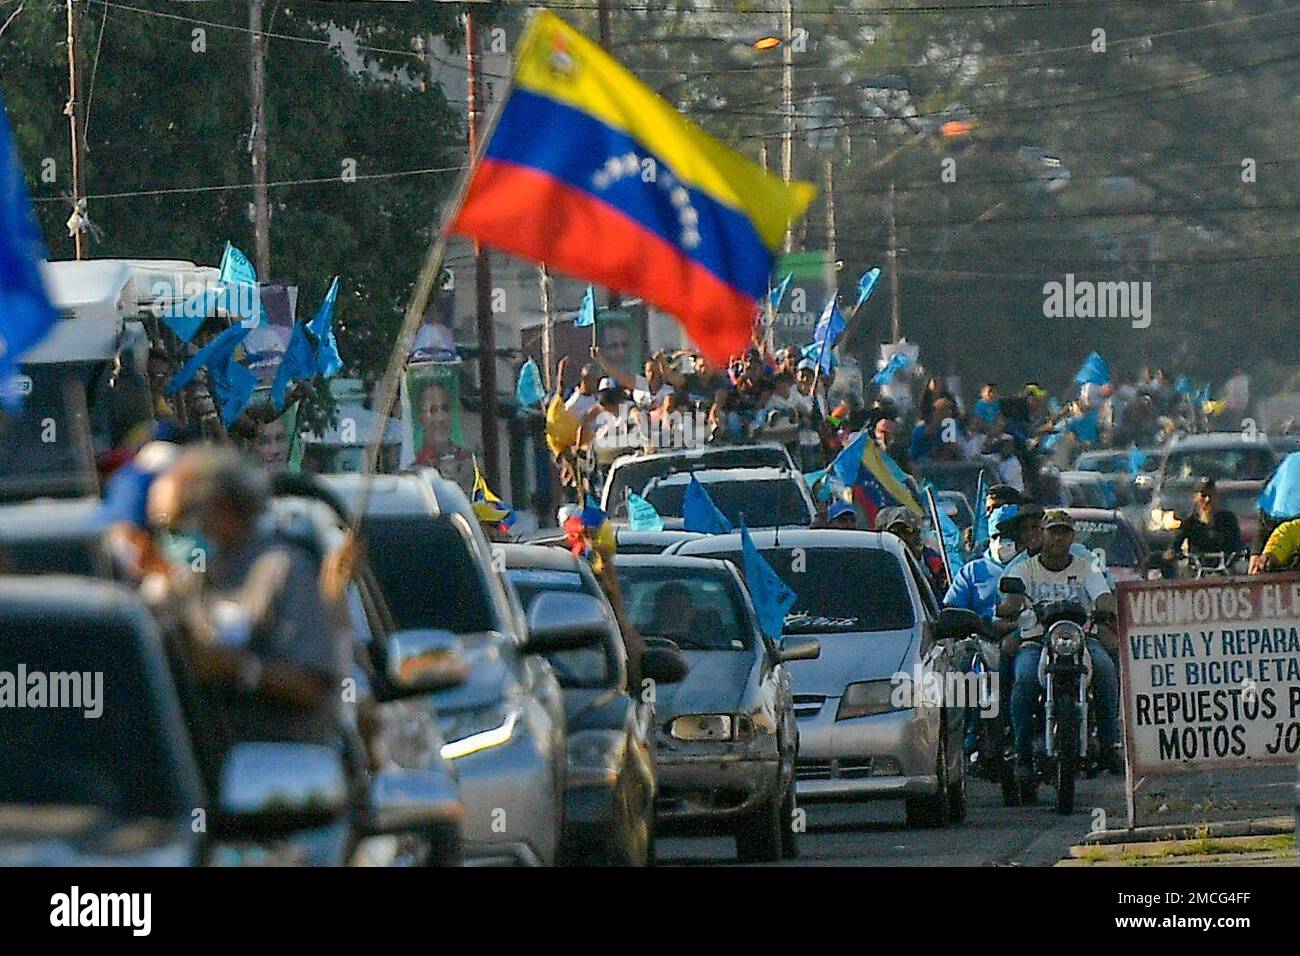 Supporters of opposition candidate for governor, Sergio Garrido, rally in  Barinas, Venezuela, Thursday, Jan. 6, 2022. The country's highest court  disqualified opposition candidate Freddy Superlano as he was leading the  count in